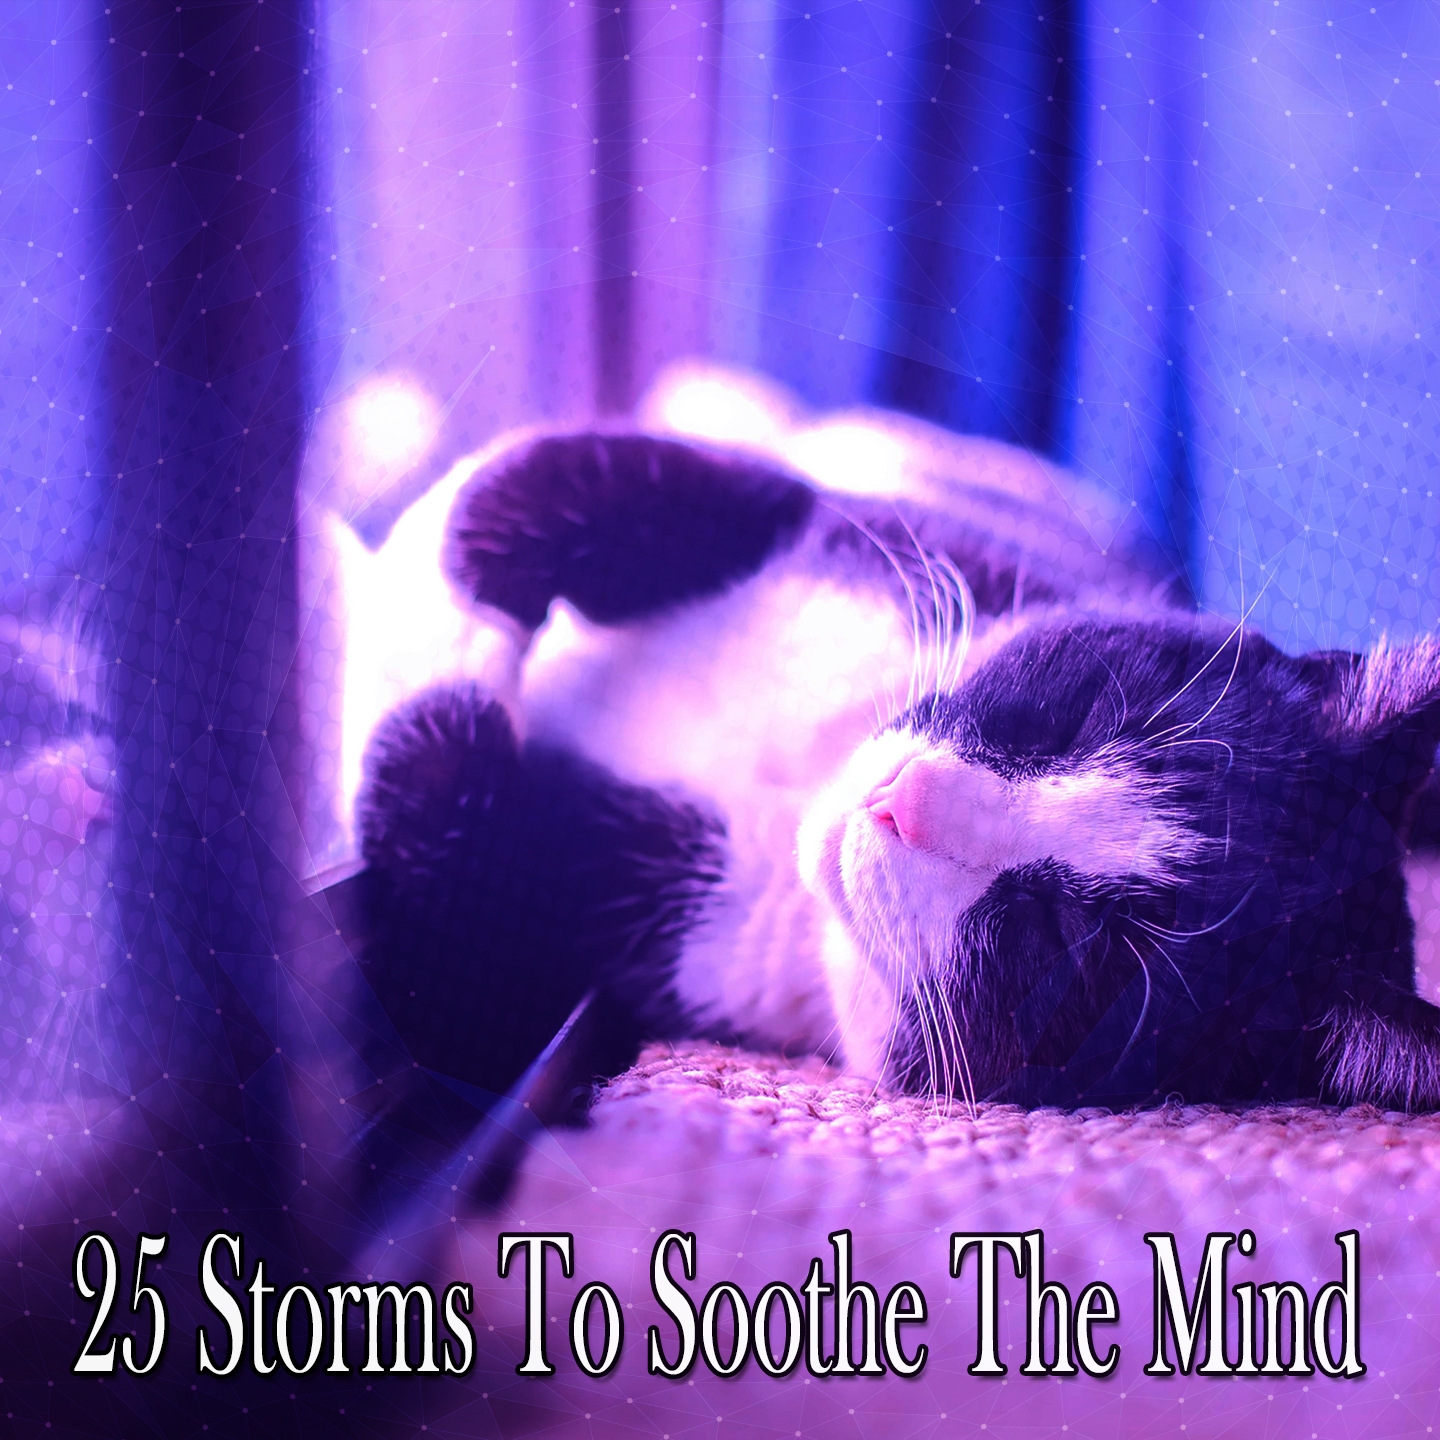 25 Storms To Soothe The Mind